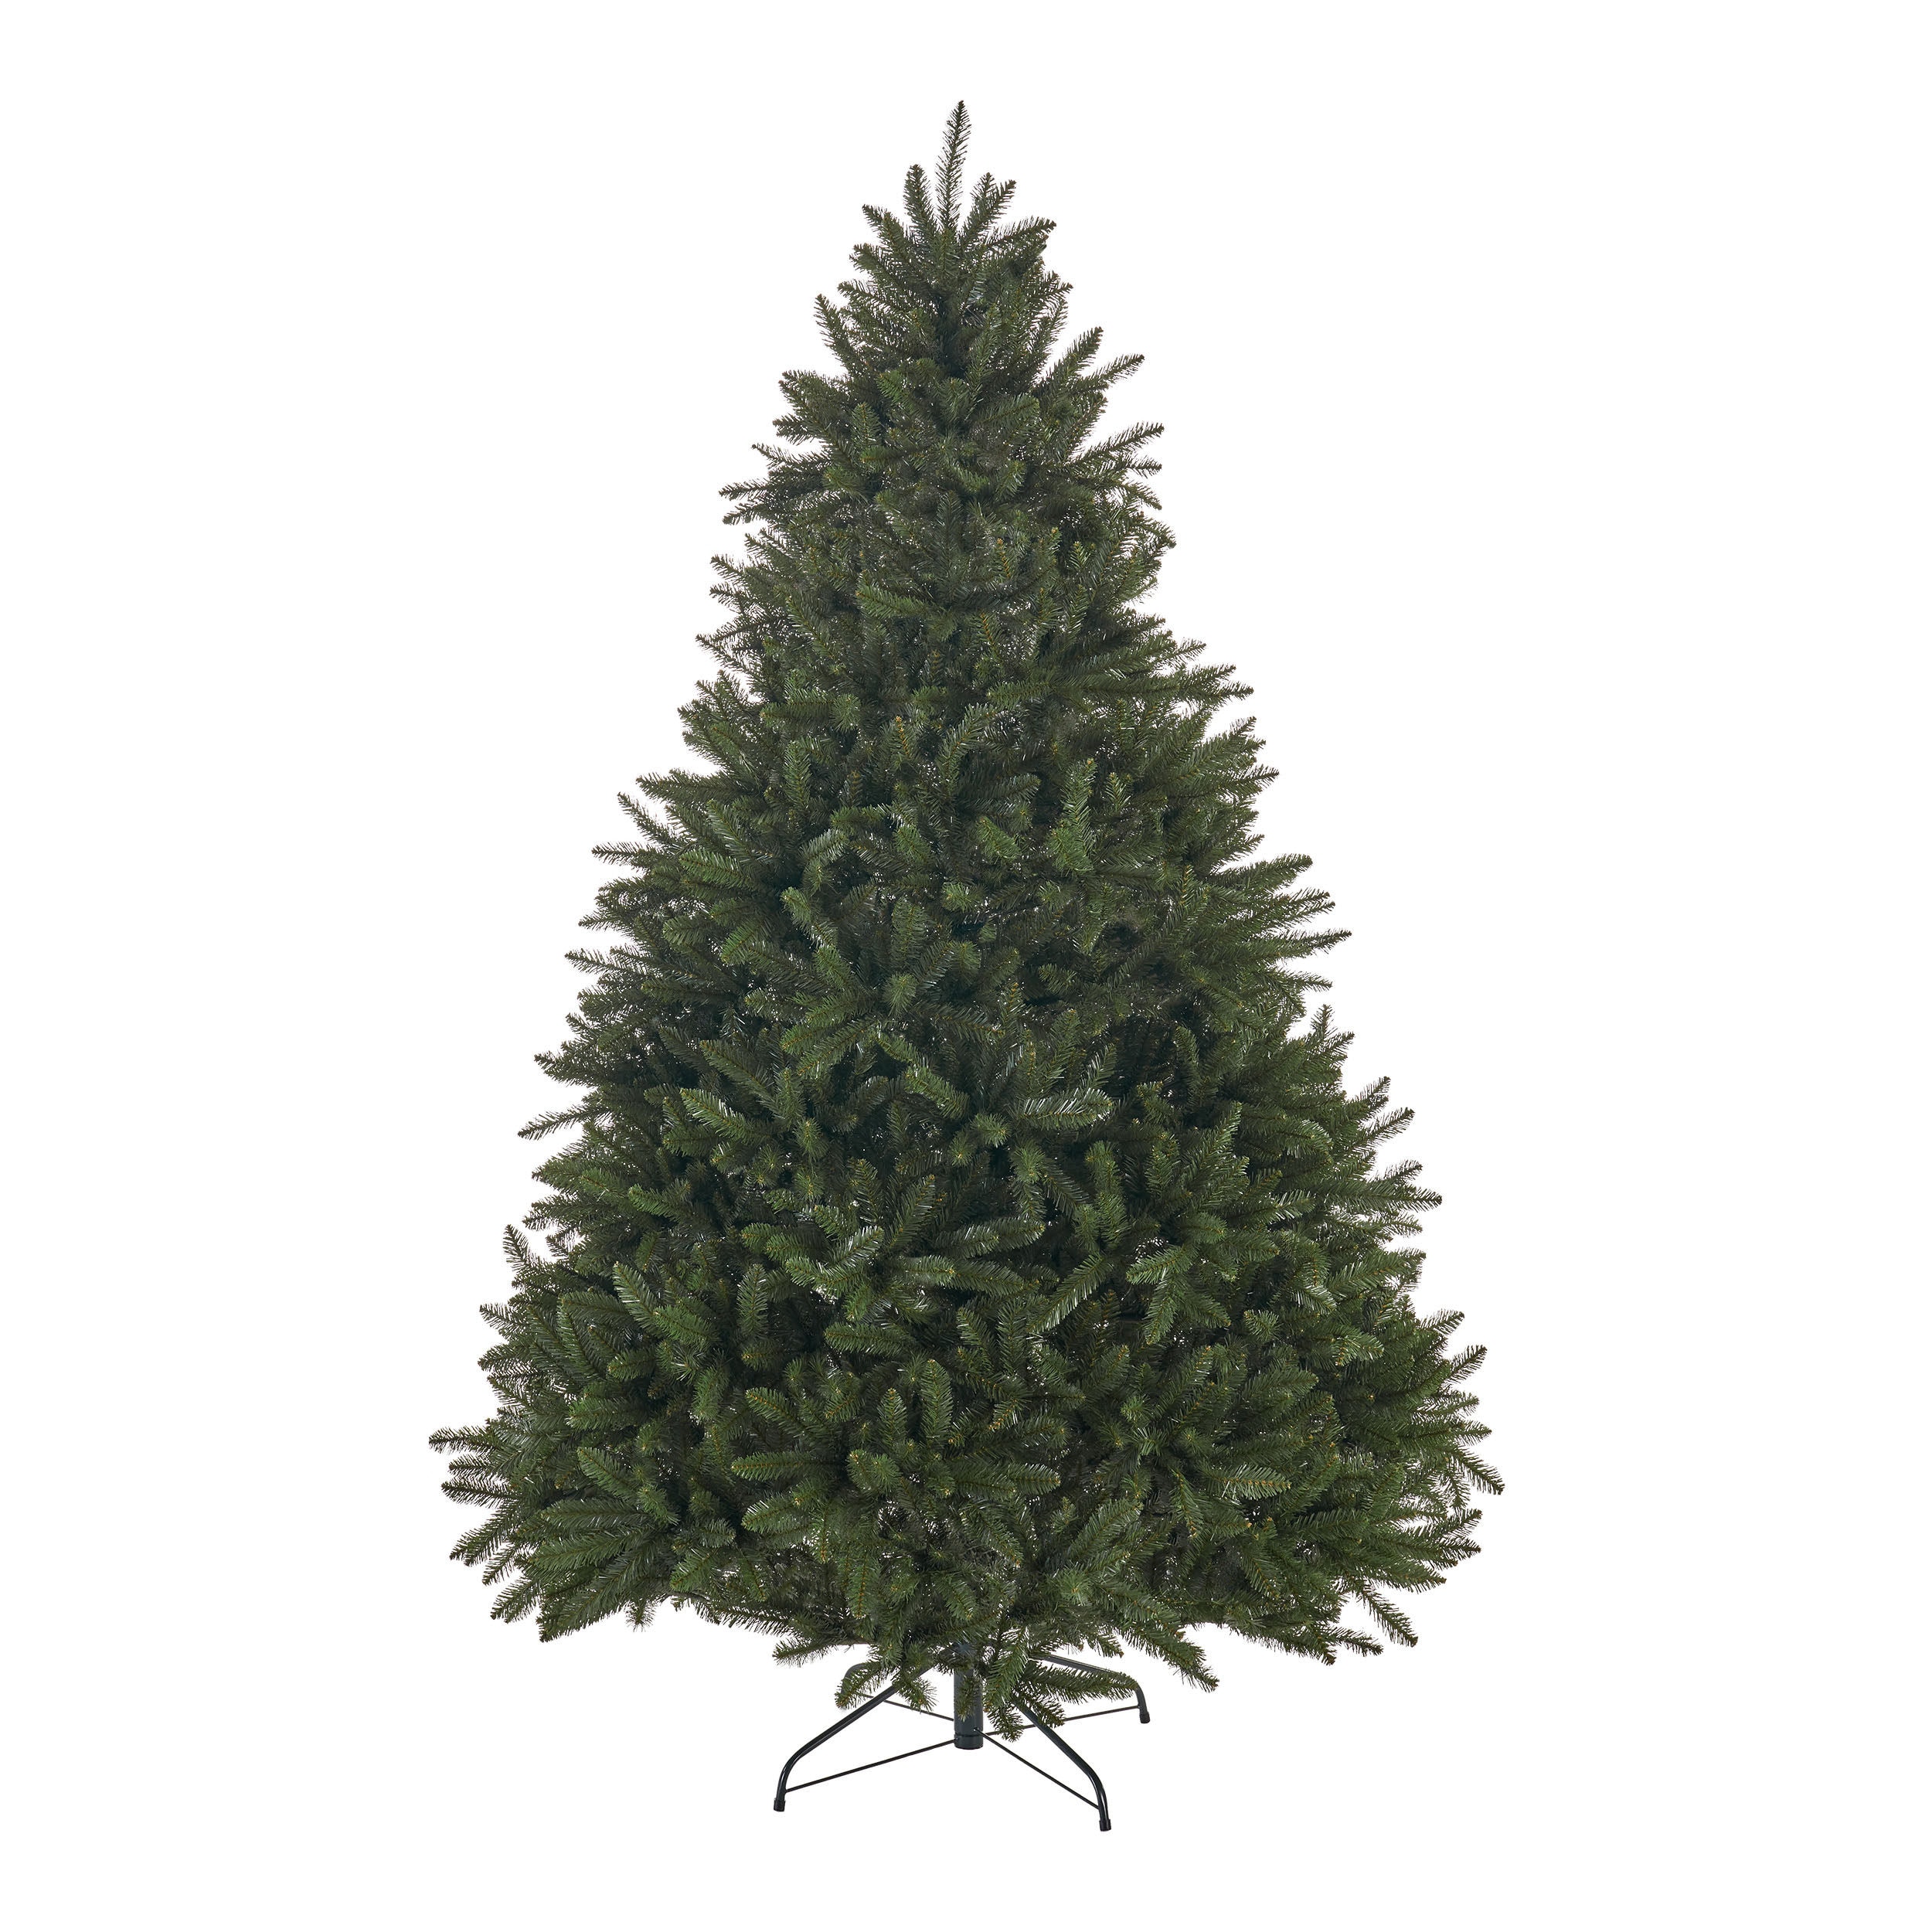 Best Selling Home Decor 9-ft Spruce Artificial Christmas Tree in ...